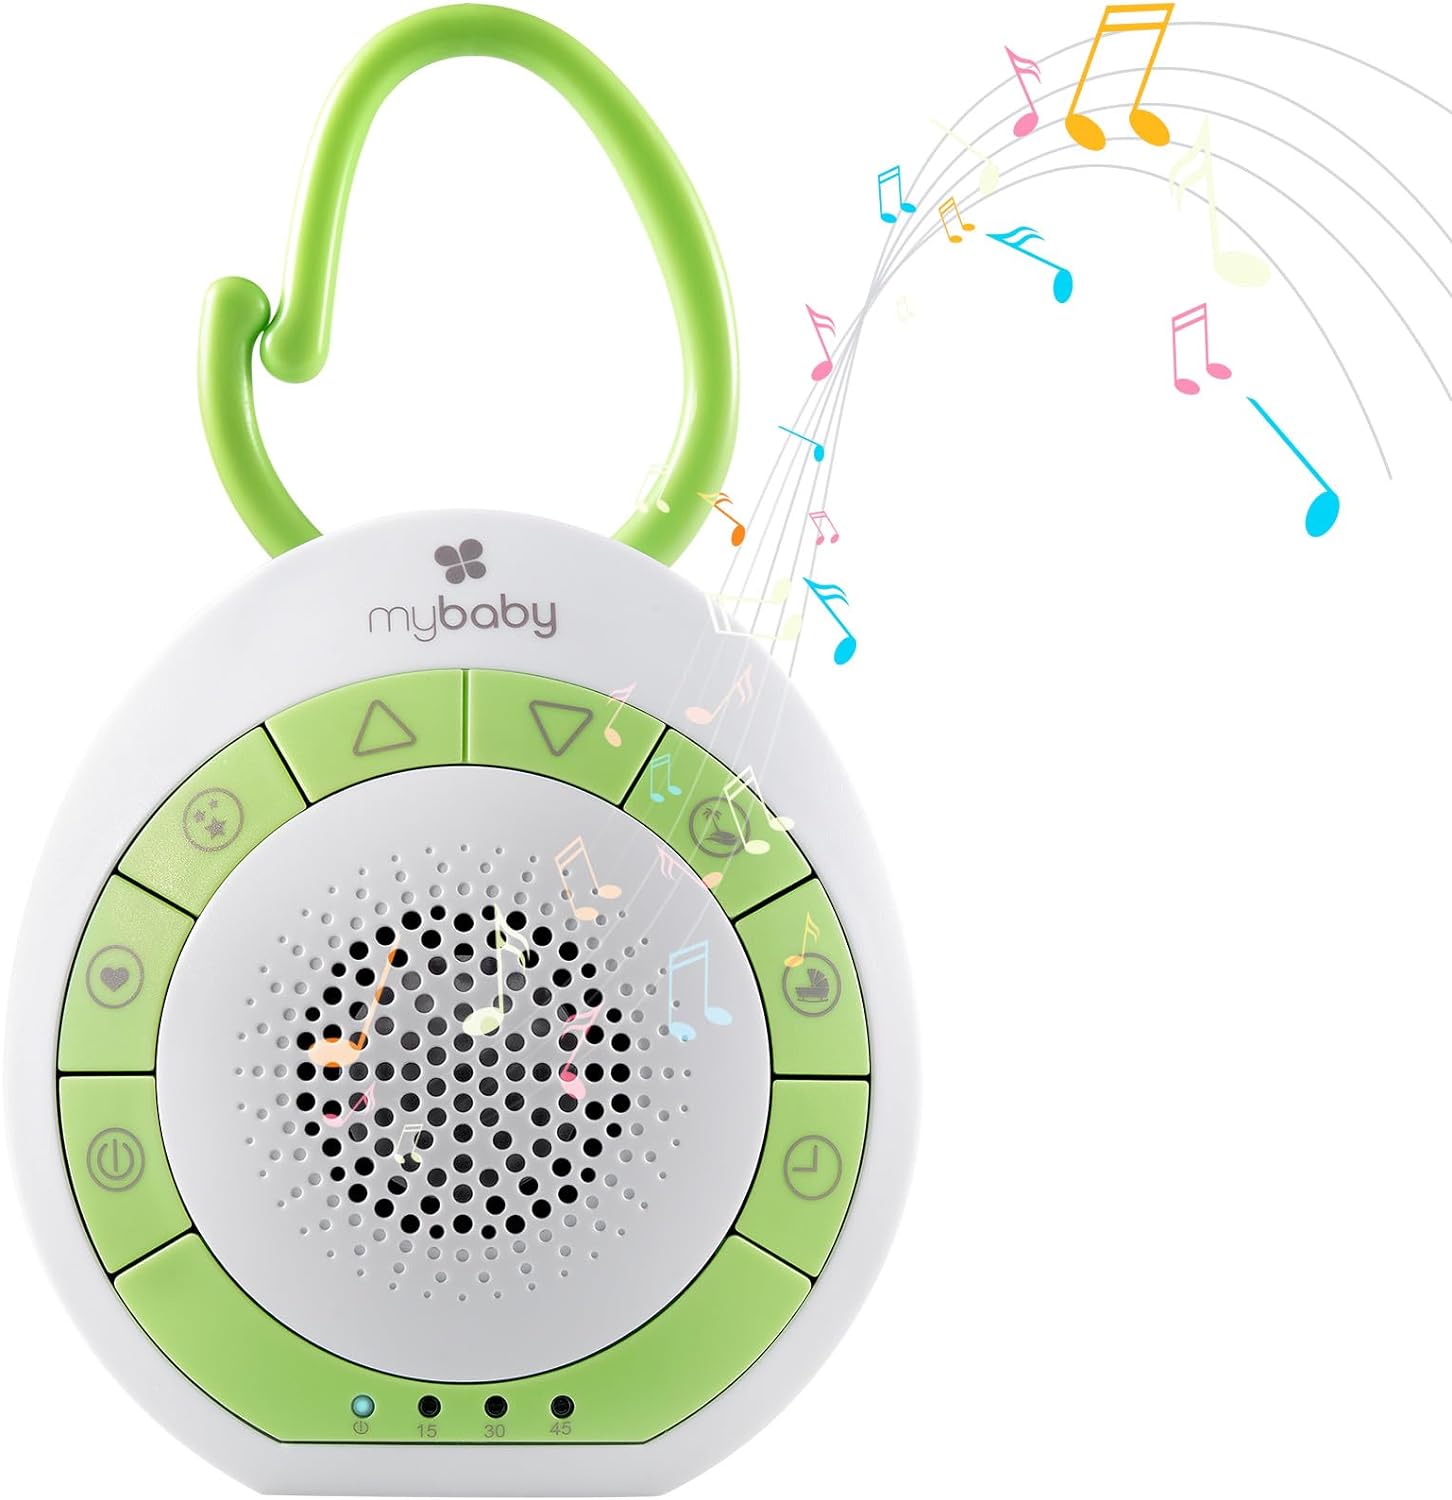 The MyBaby SoundSpa On‐The‐Go Baby Soother Sleep Aid, featured in our guide to the best baby sleep aids